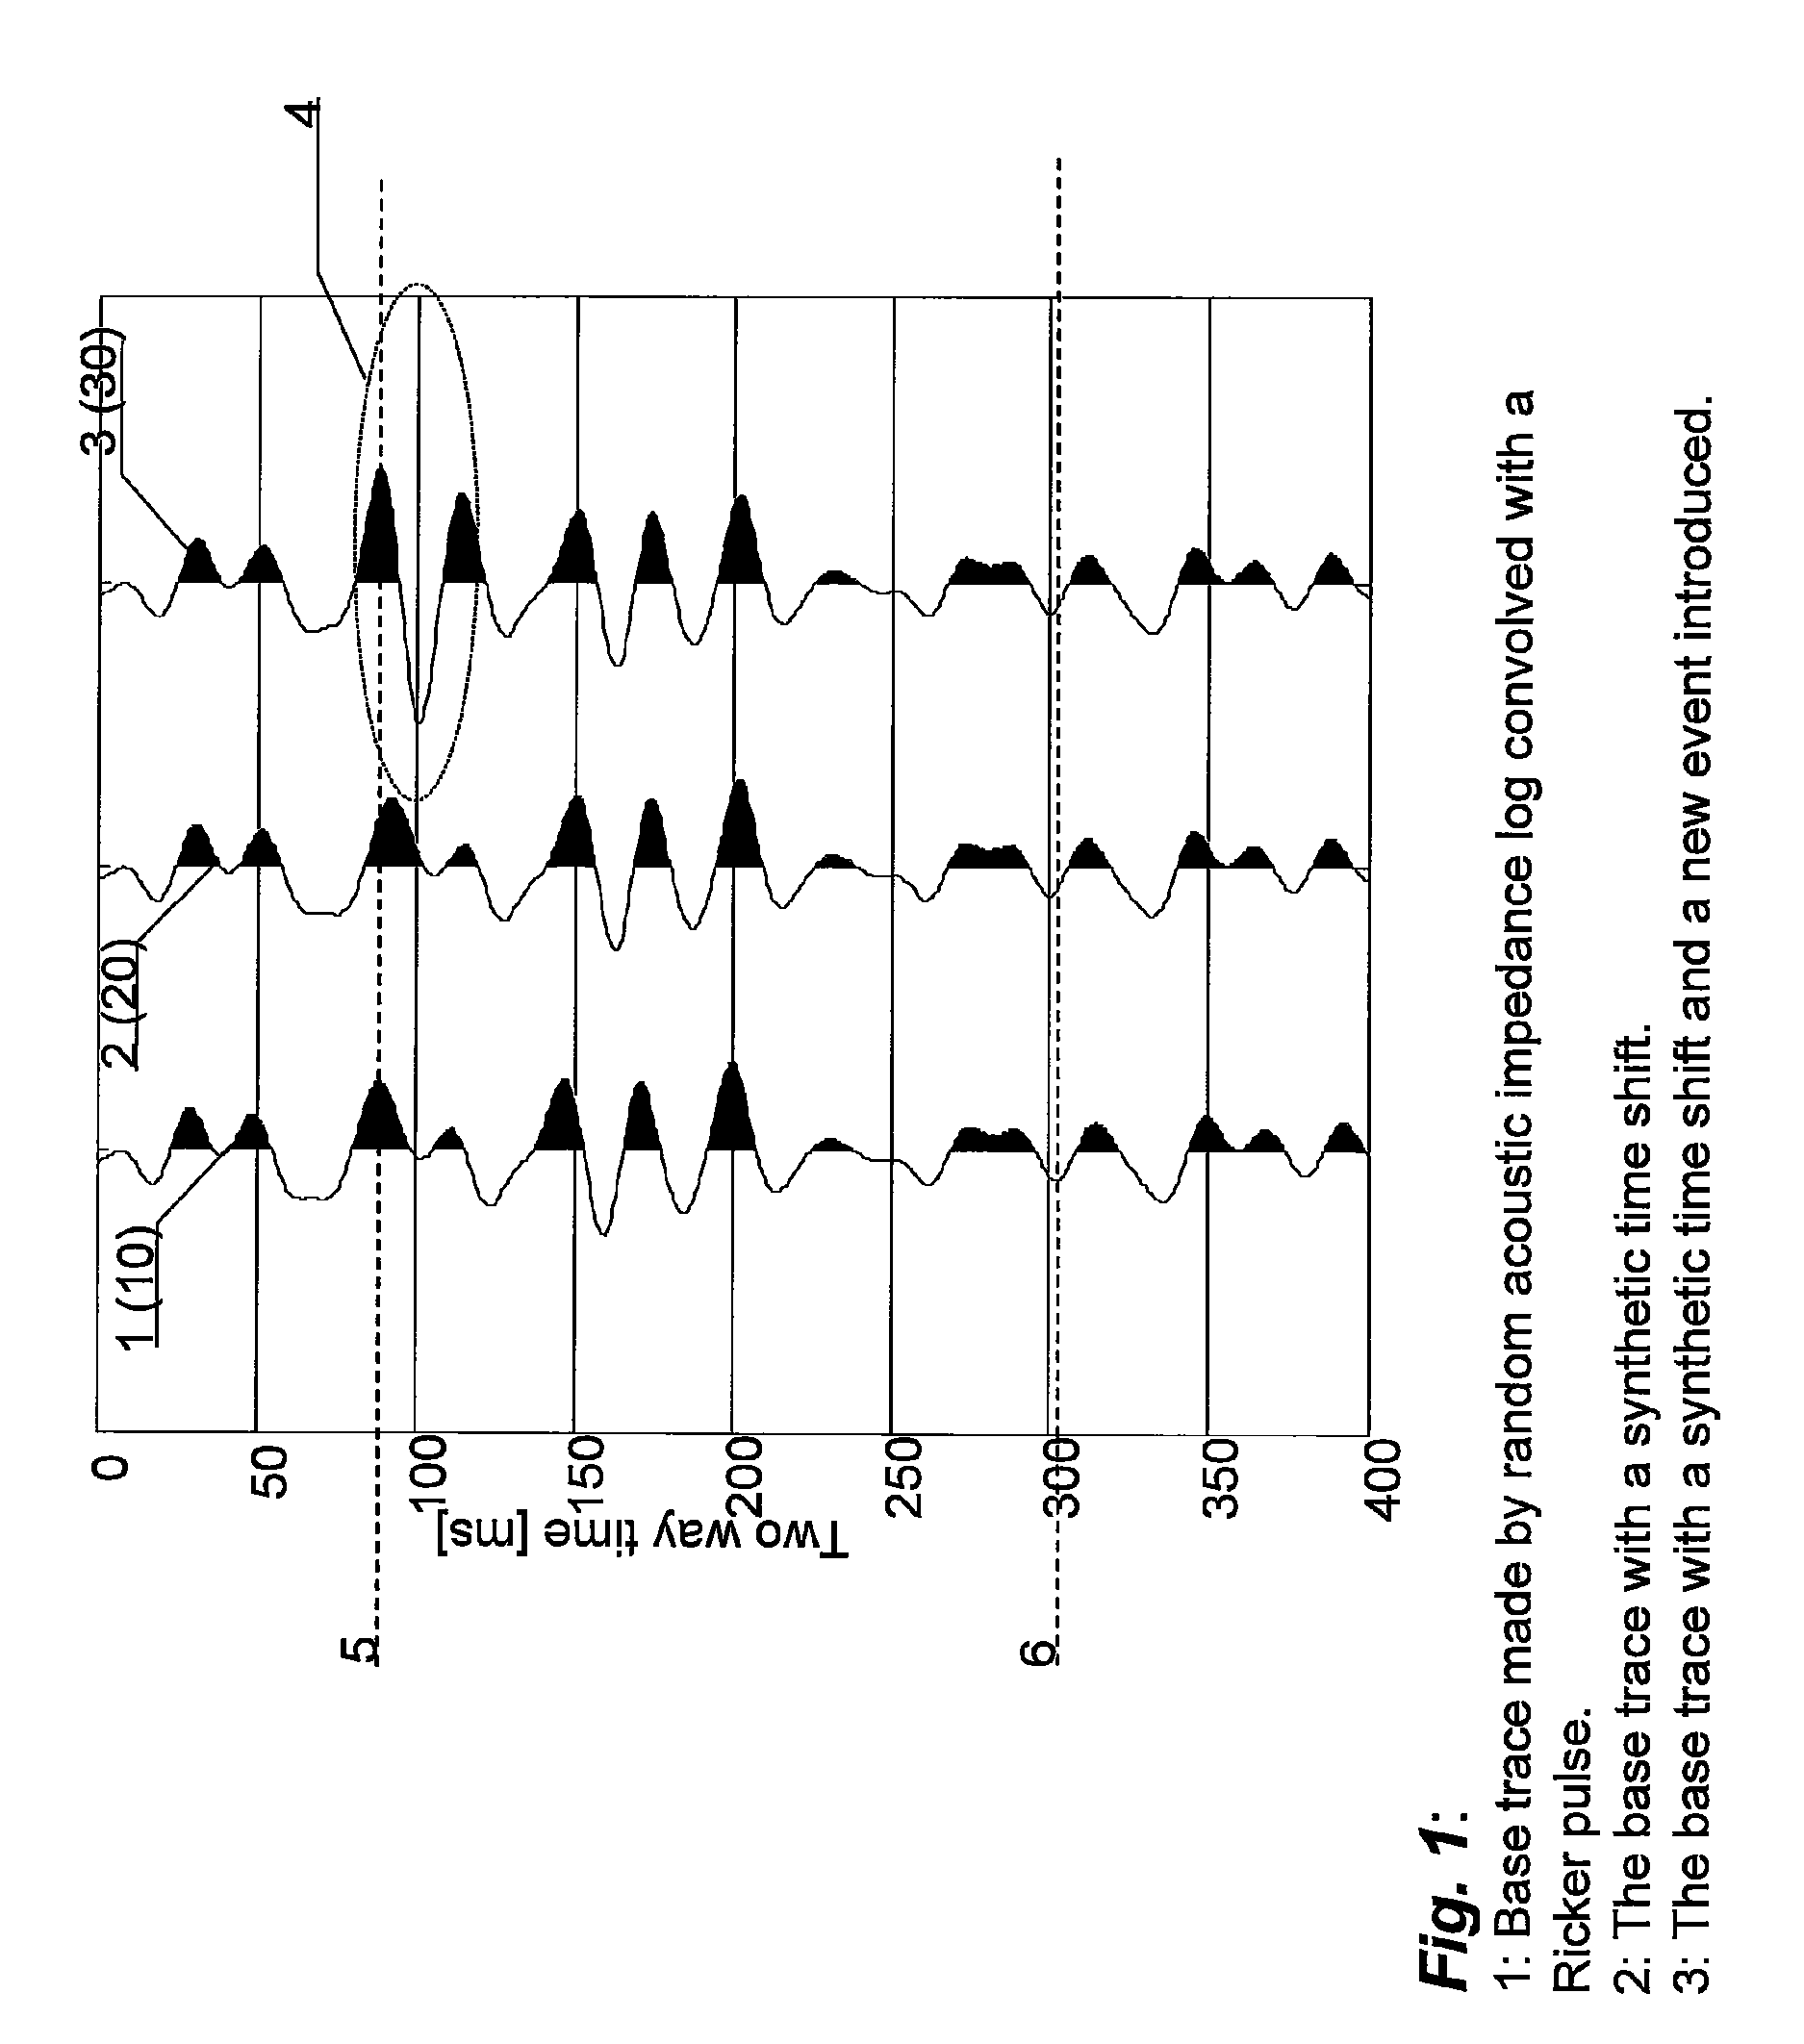 Method for reflection time shift matching a first and a second set of seismic reflection data